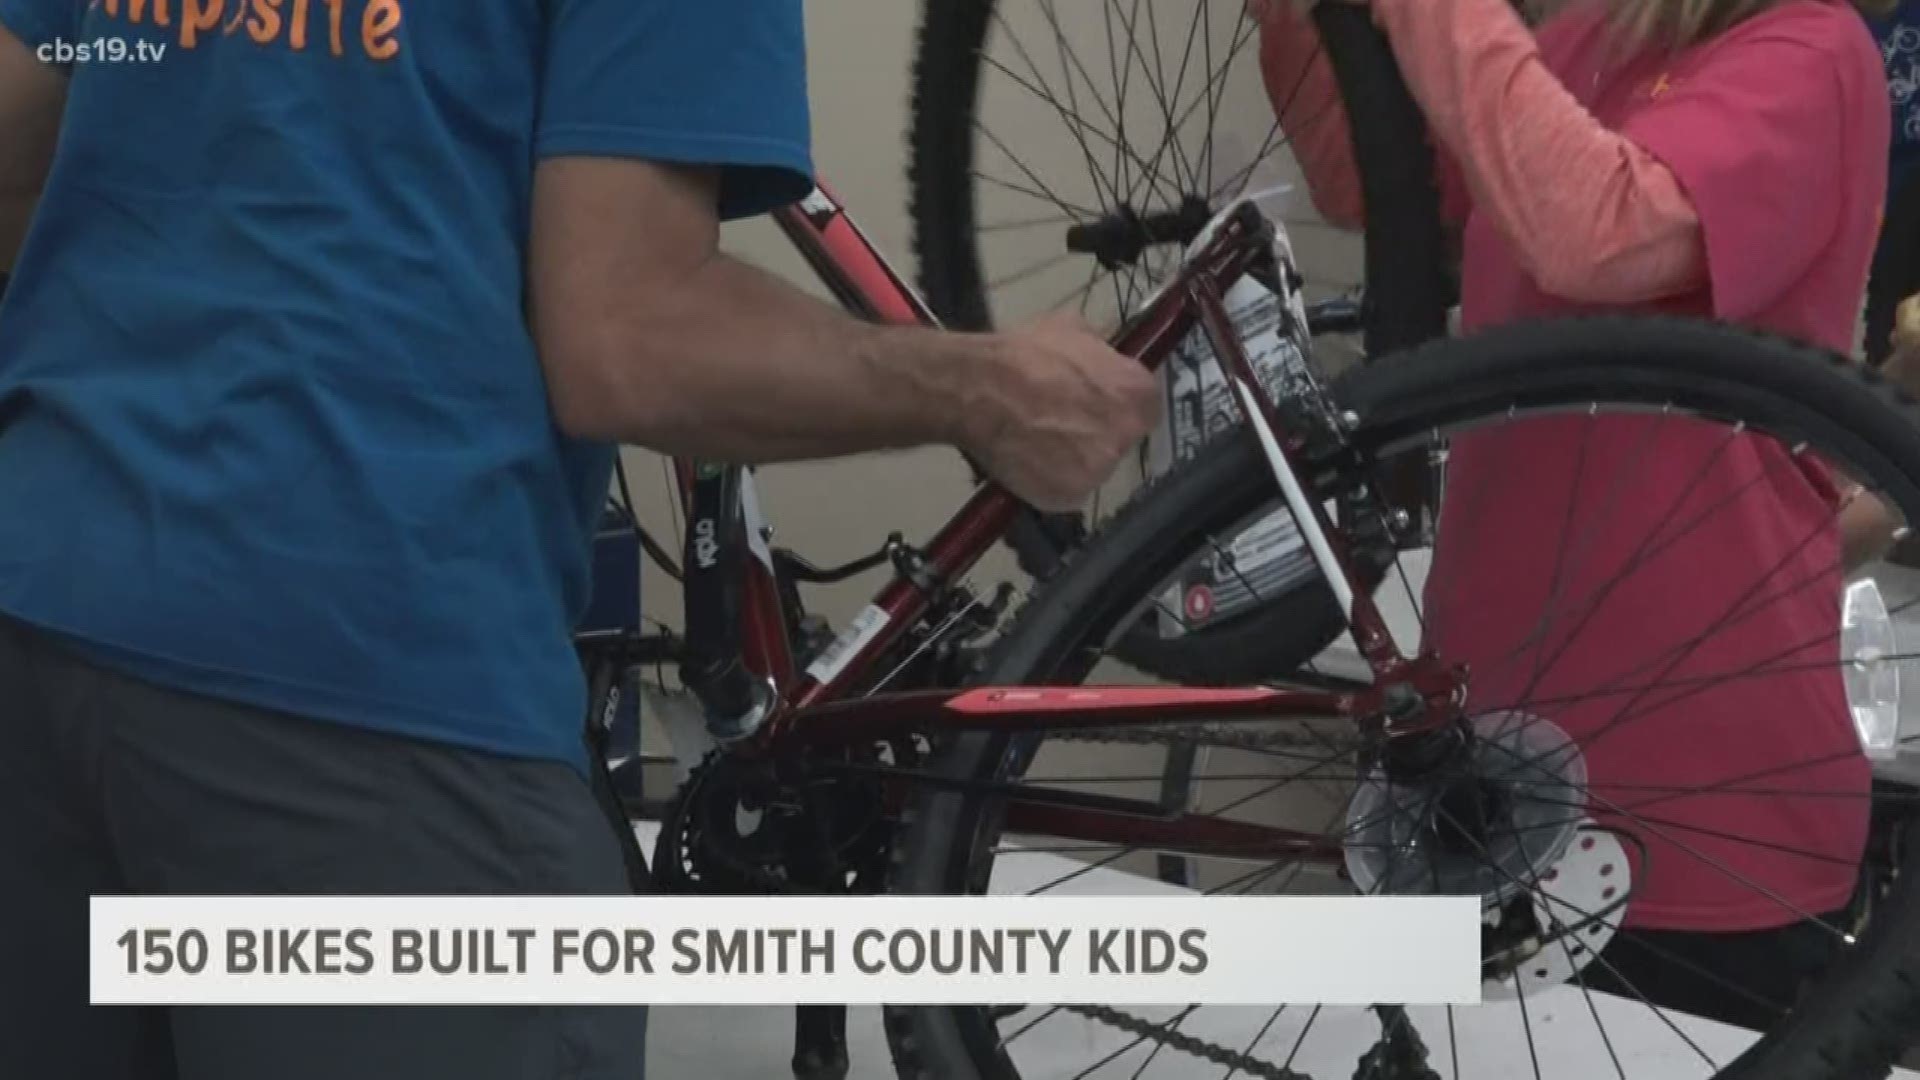 The bike build is part of The Salvation Army's annual Angel Tree program which provides gifts to over 2,000 children and seniors in Tyler and Smith County.